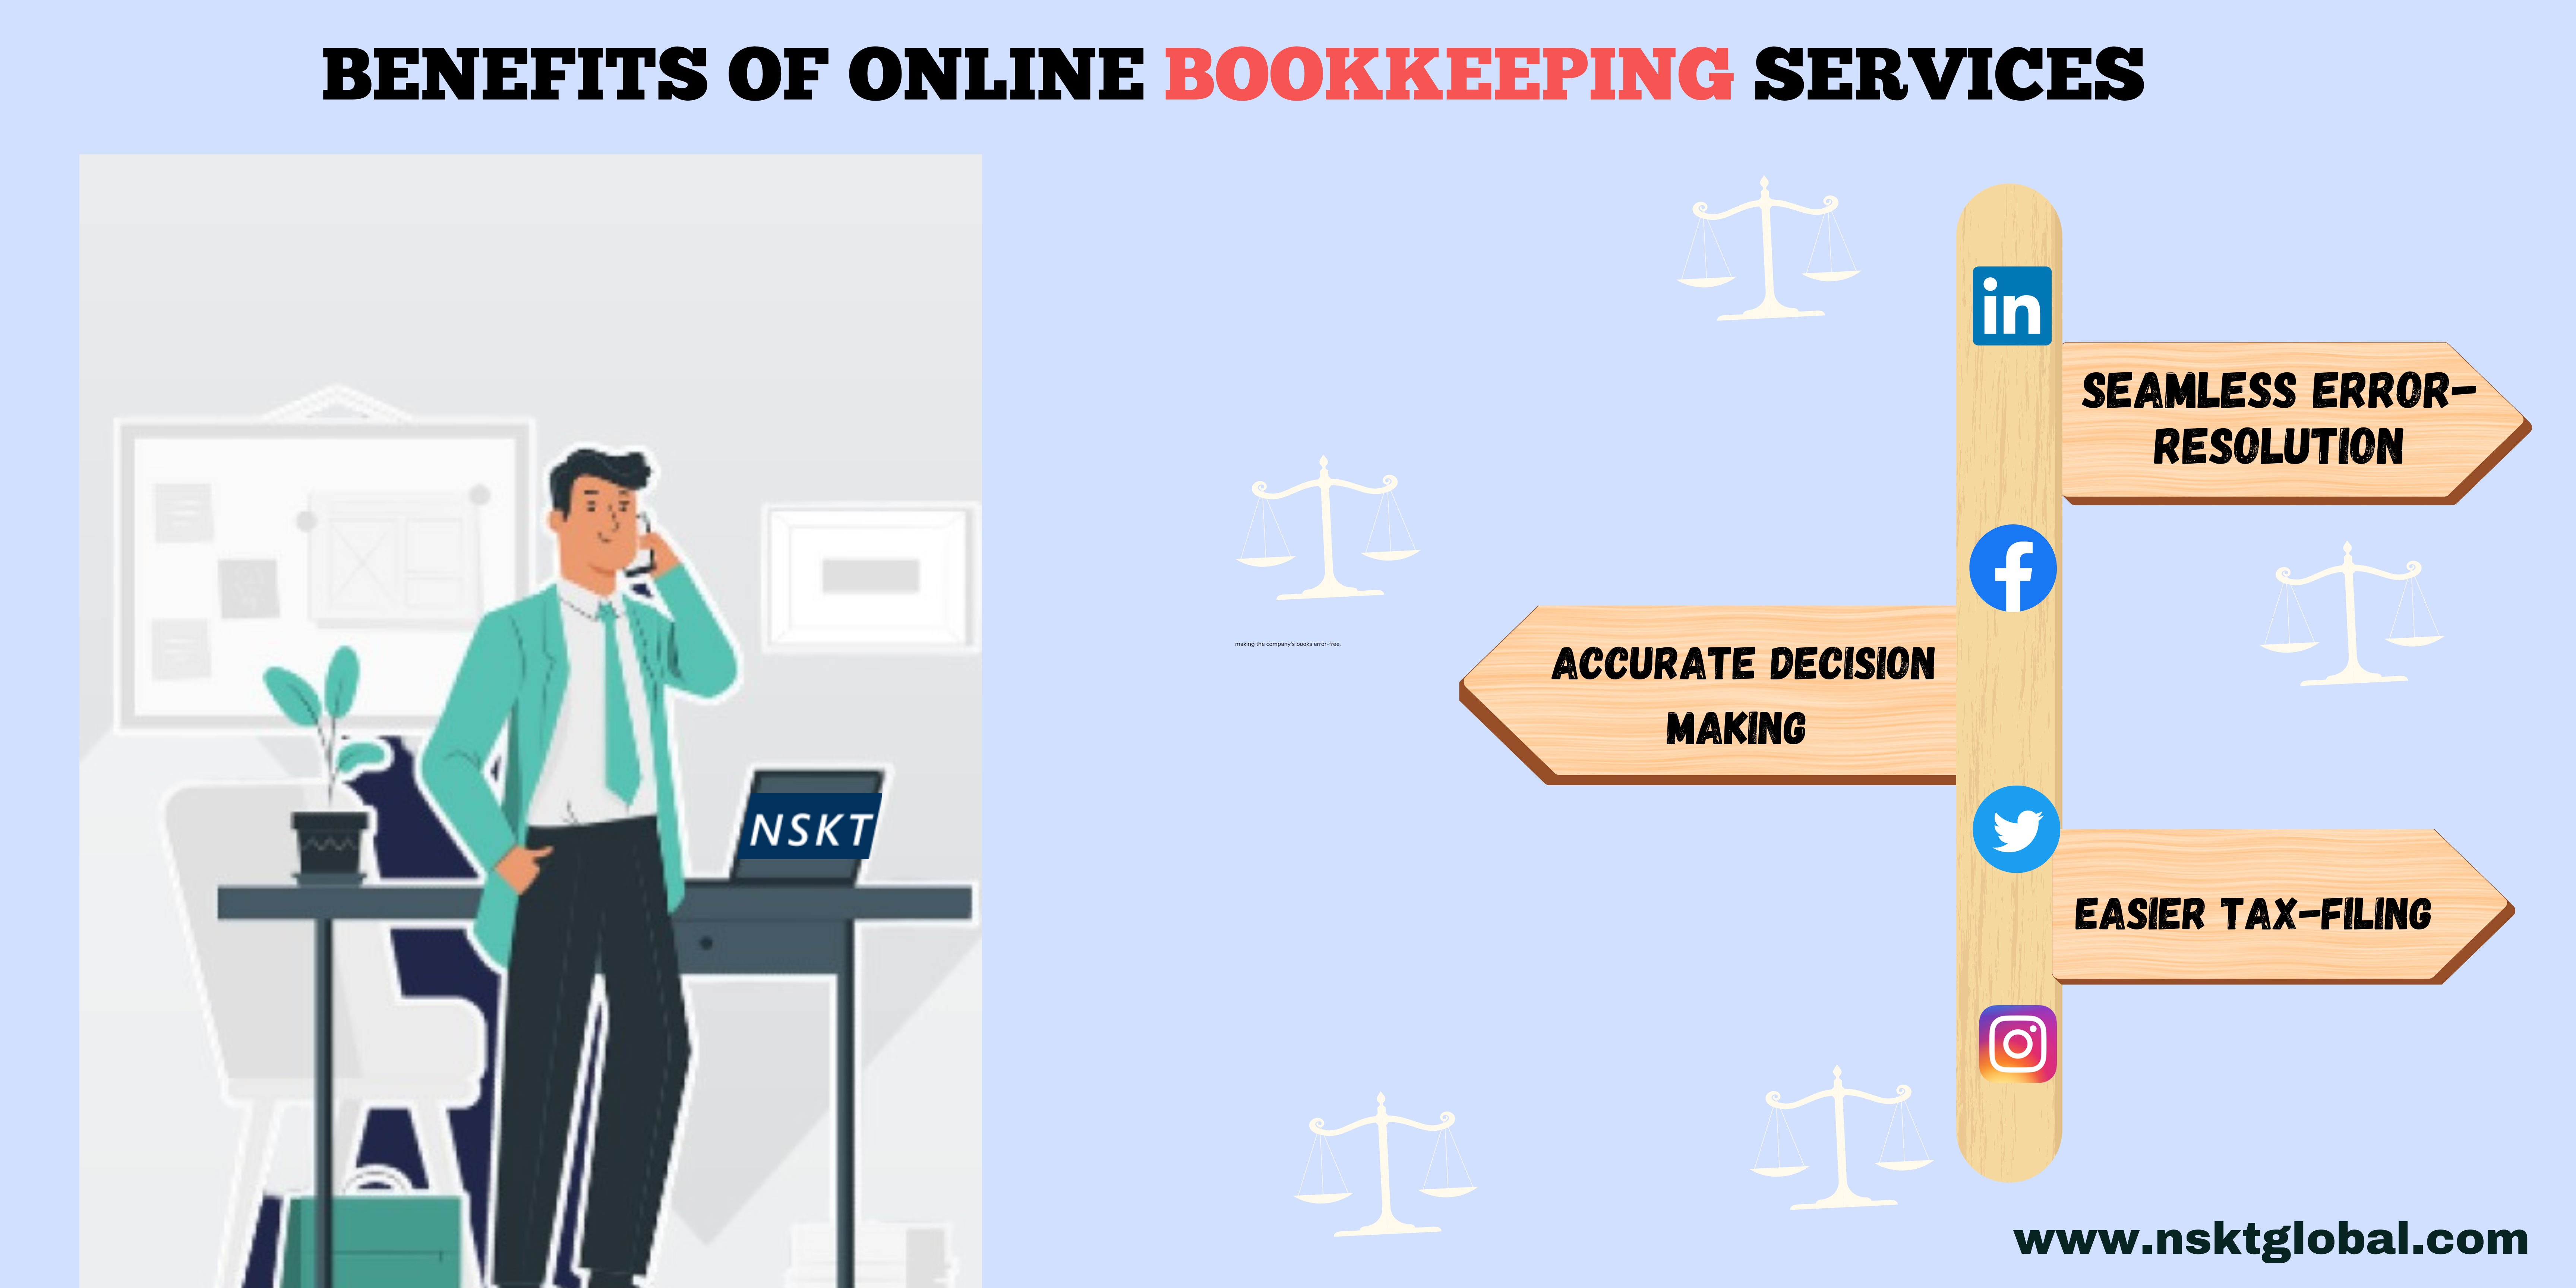 Accounting Bookkeeping services for Small Start-ups